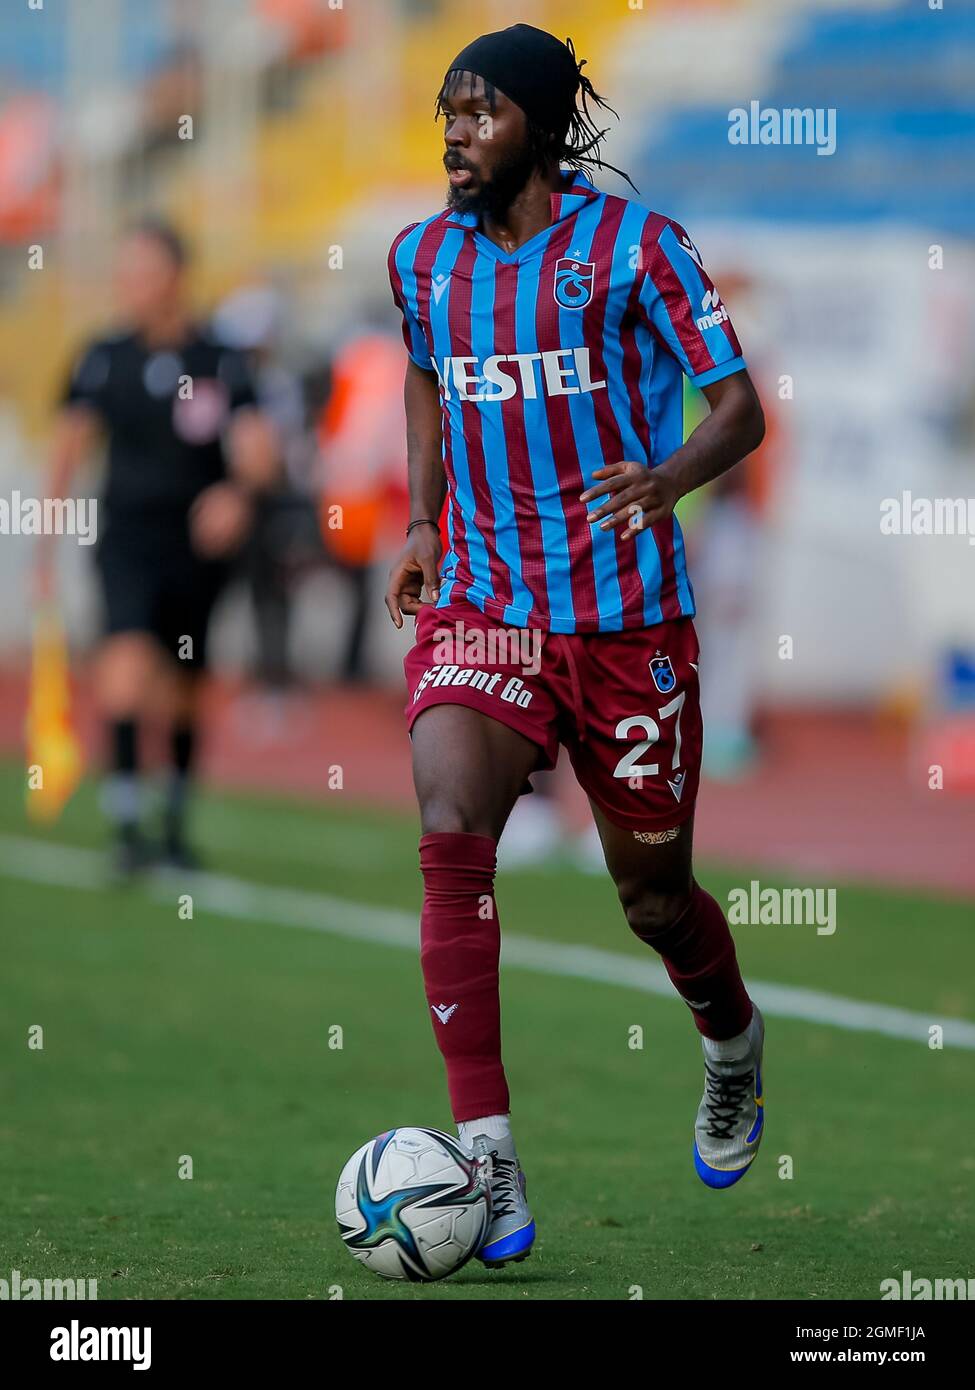 ISTANBUL, TURKEY - SEPTEMBER 18: Gervinho of Trabzonspor during the Super Lig match between Kasimpasa SK and Trabzonspor at the Recep Tayyip Erdogan Stadium on September 18, 2021 in Istanbul, Turkey (Photo by Orange Pictures) Stock Photo